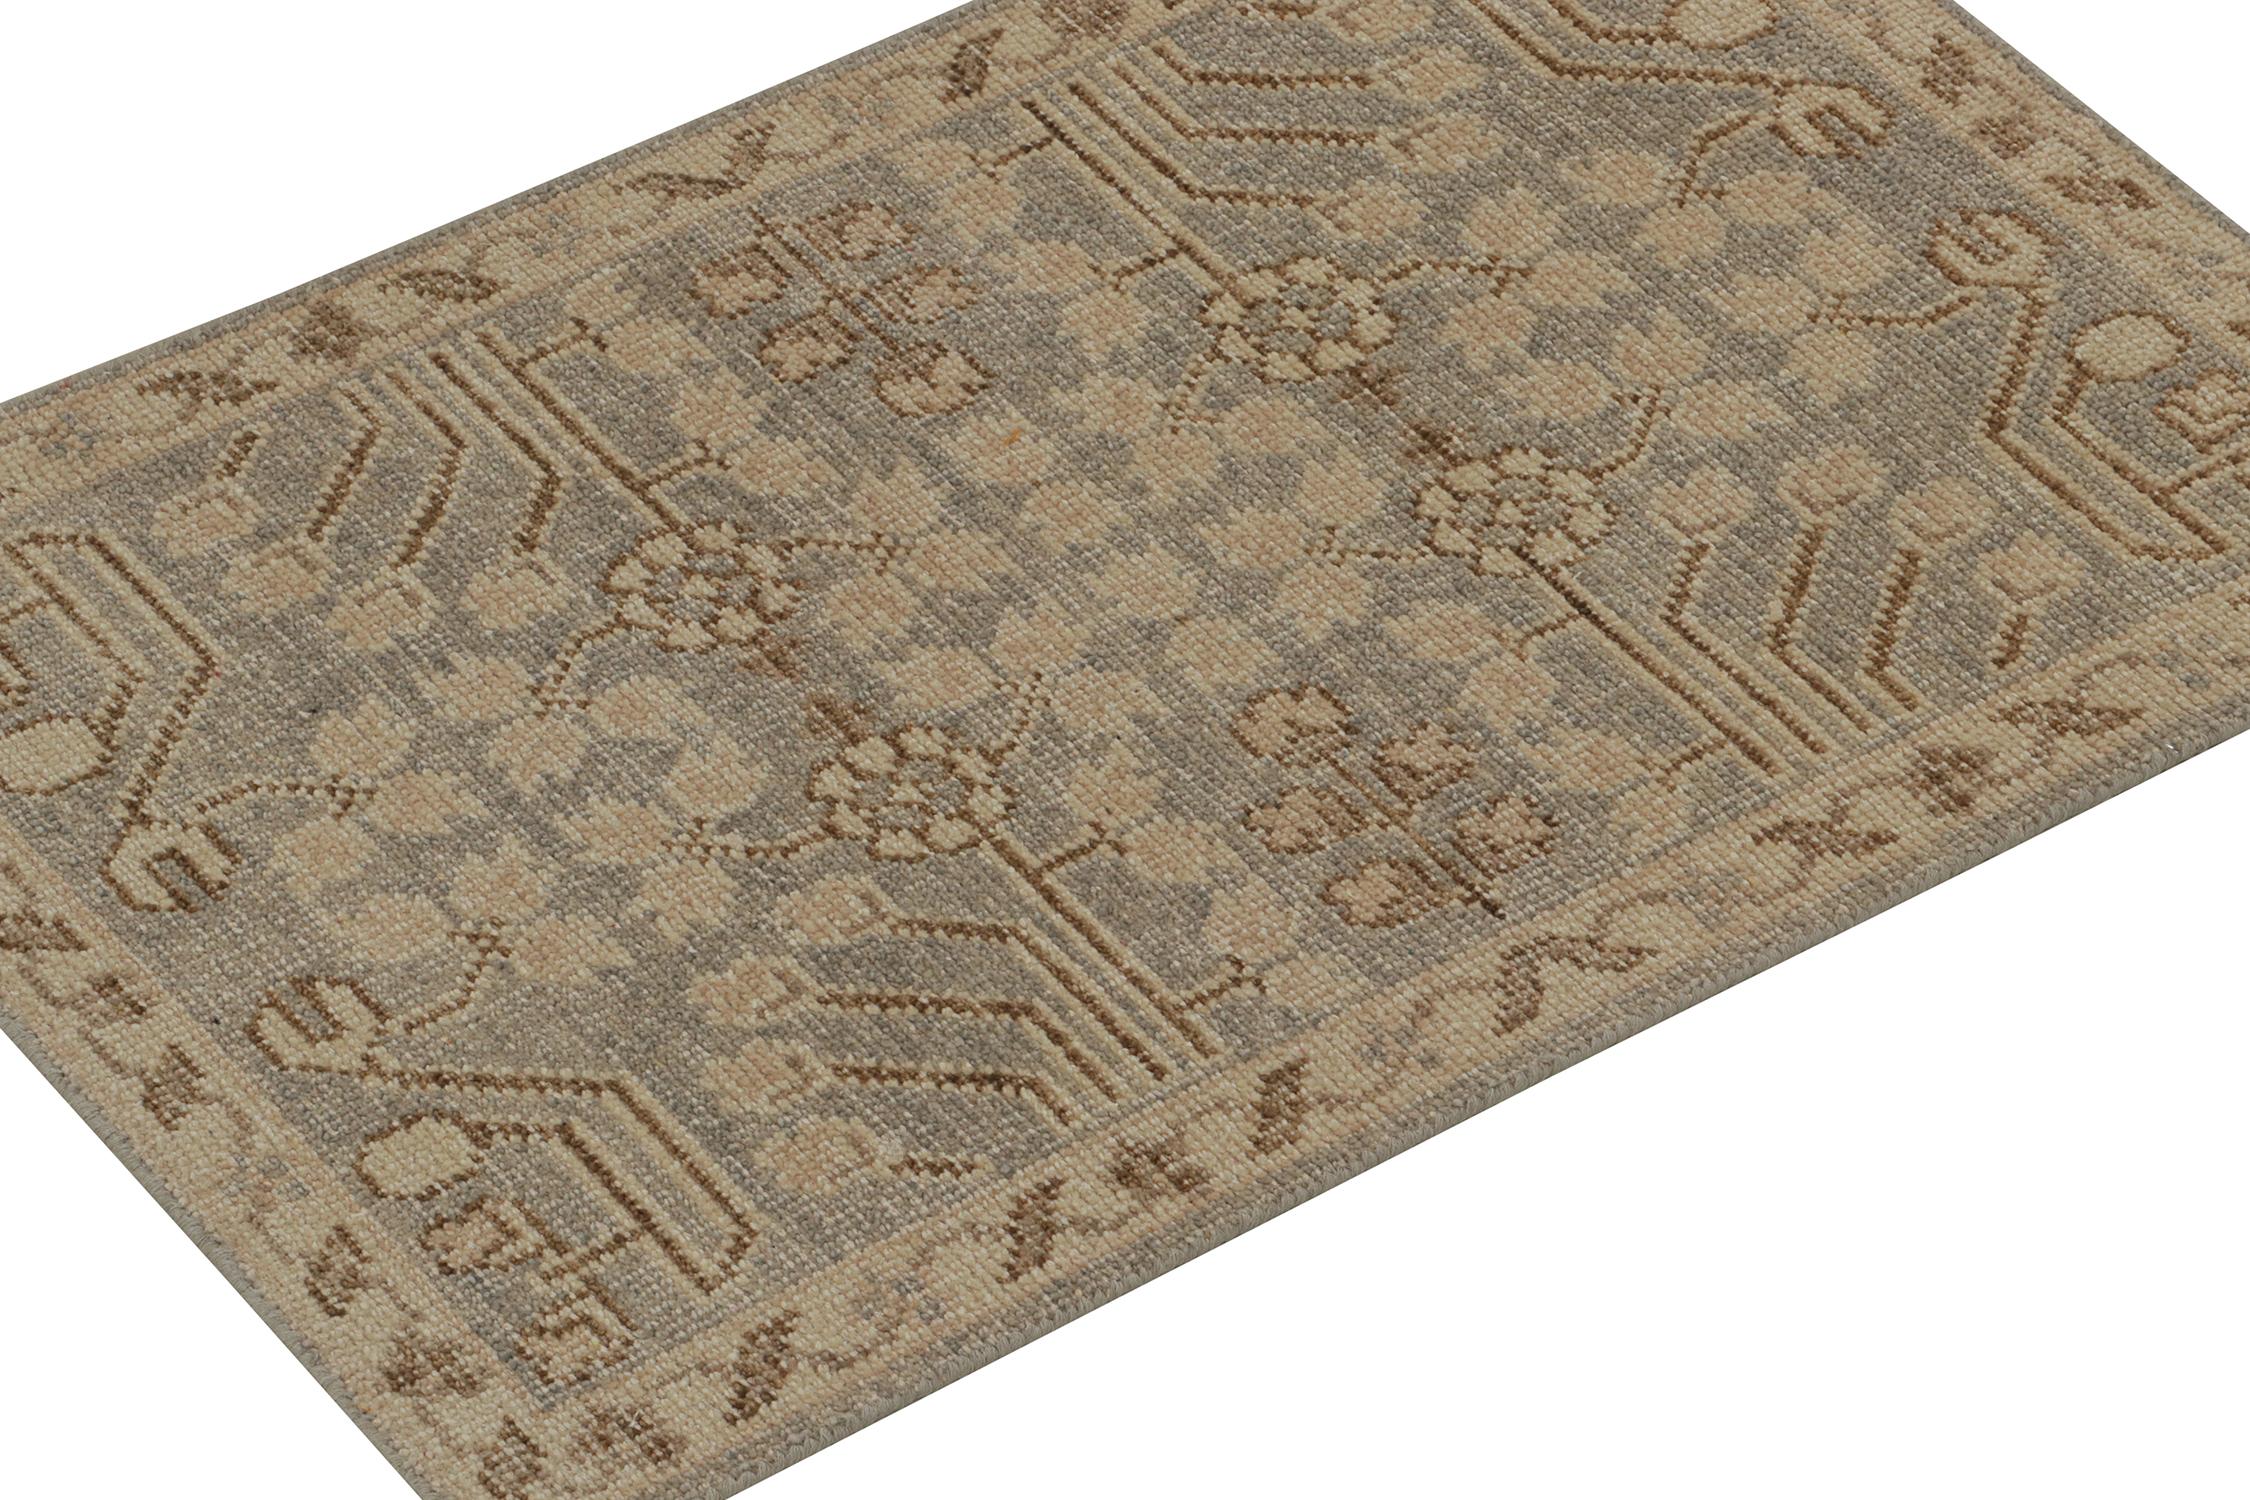 Indian Rug & Kilim Distressed Khotan style rug in Gray with Beige-Brown Classic Pattern For Sale